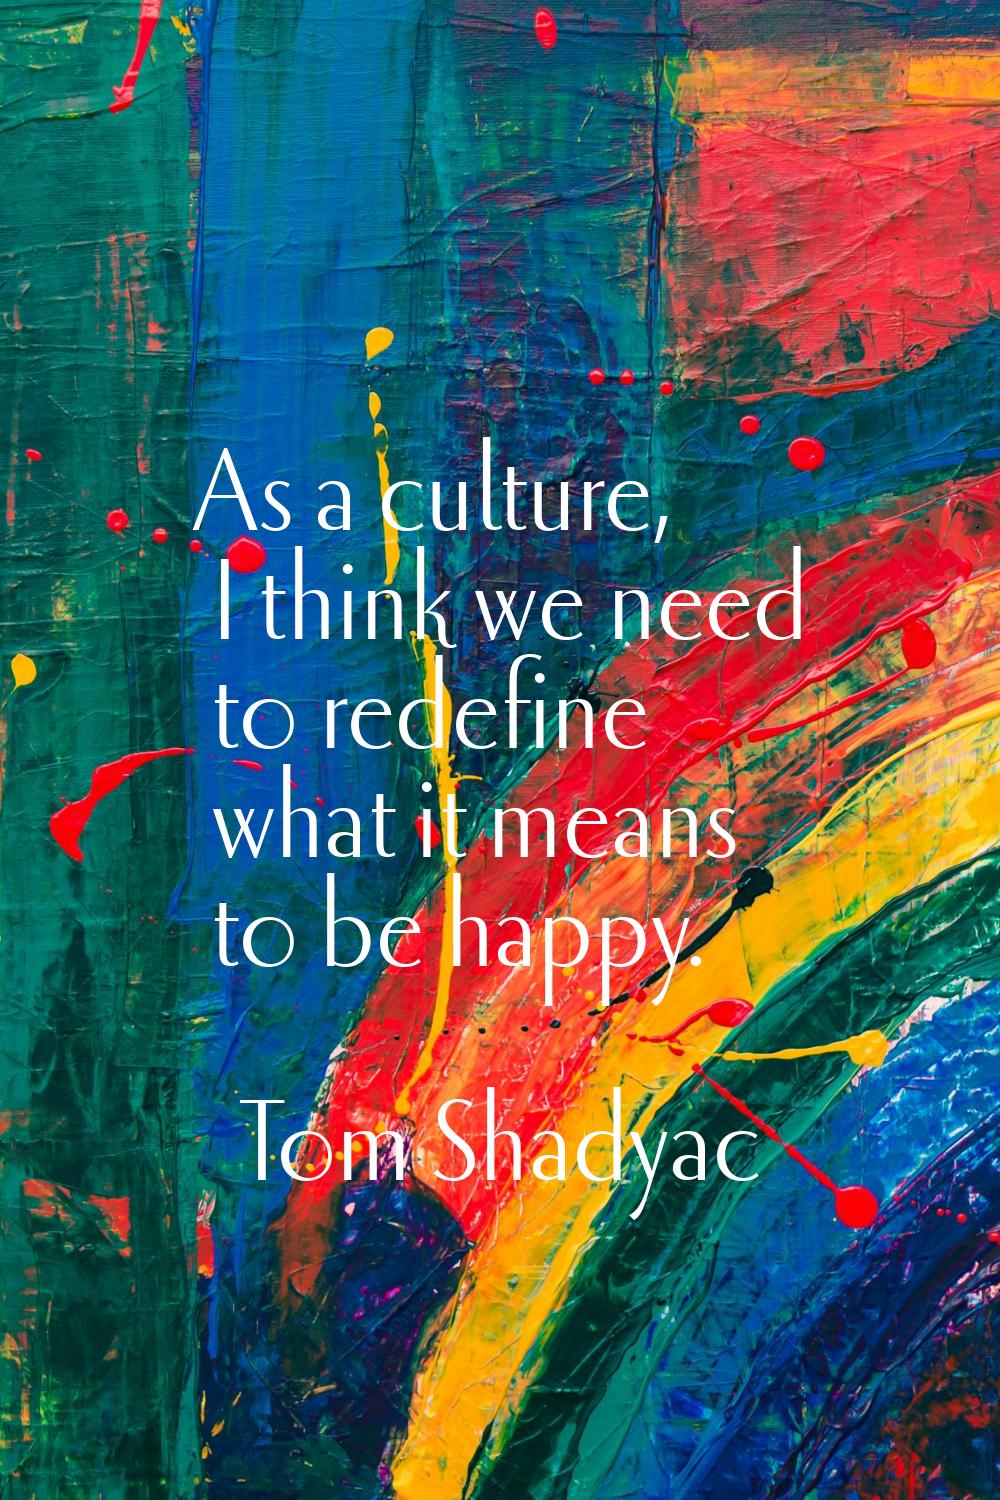 As a culture, I think we need to redefine what it means to be happy.